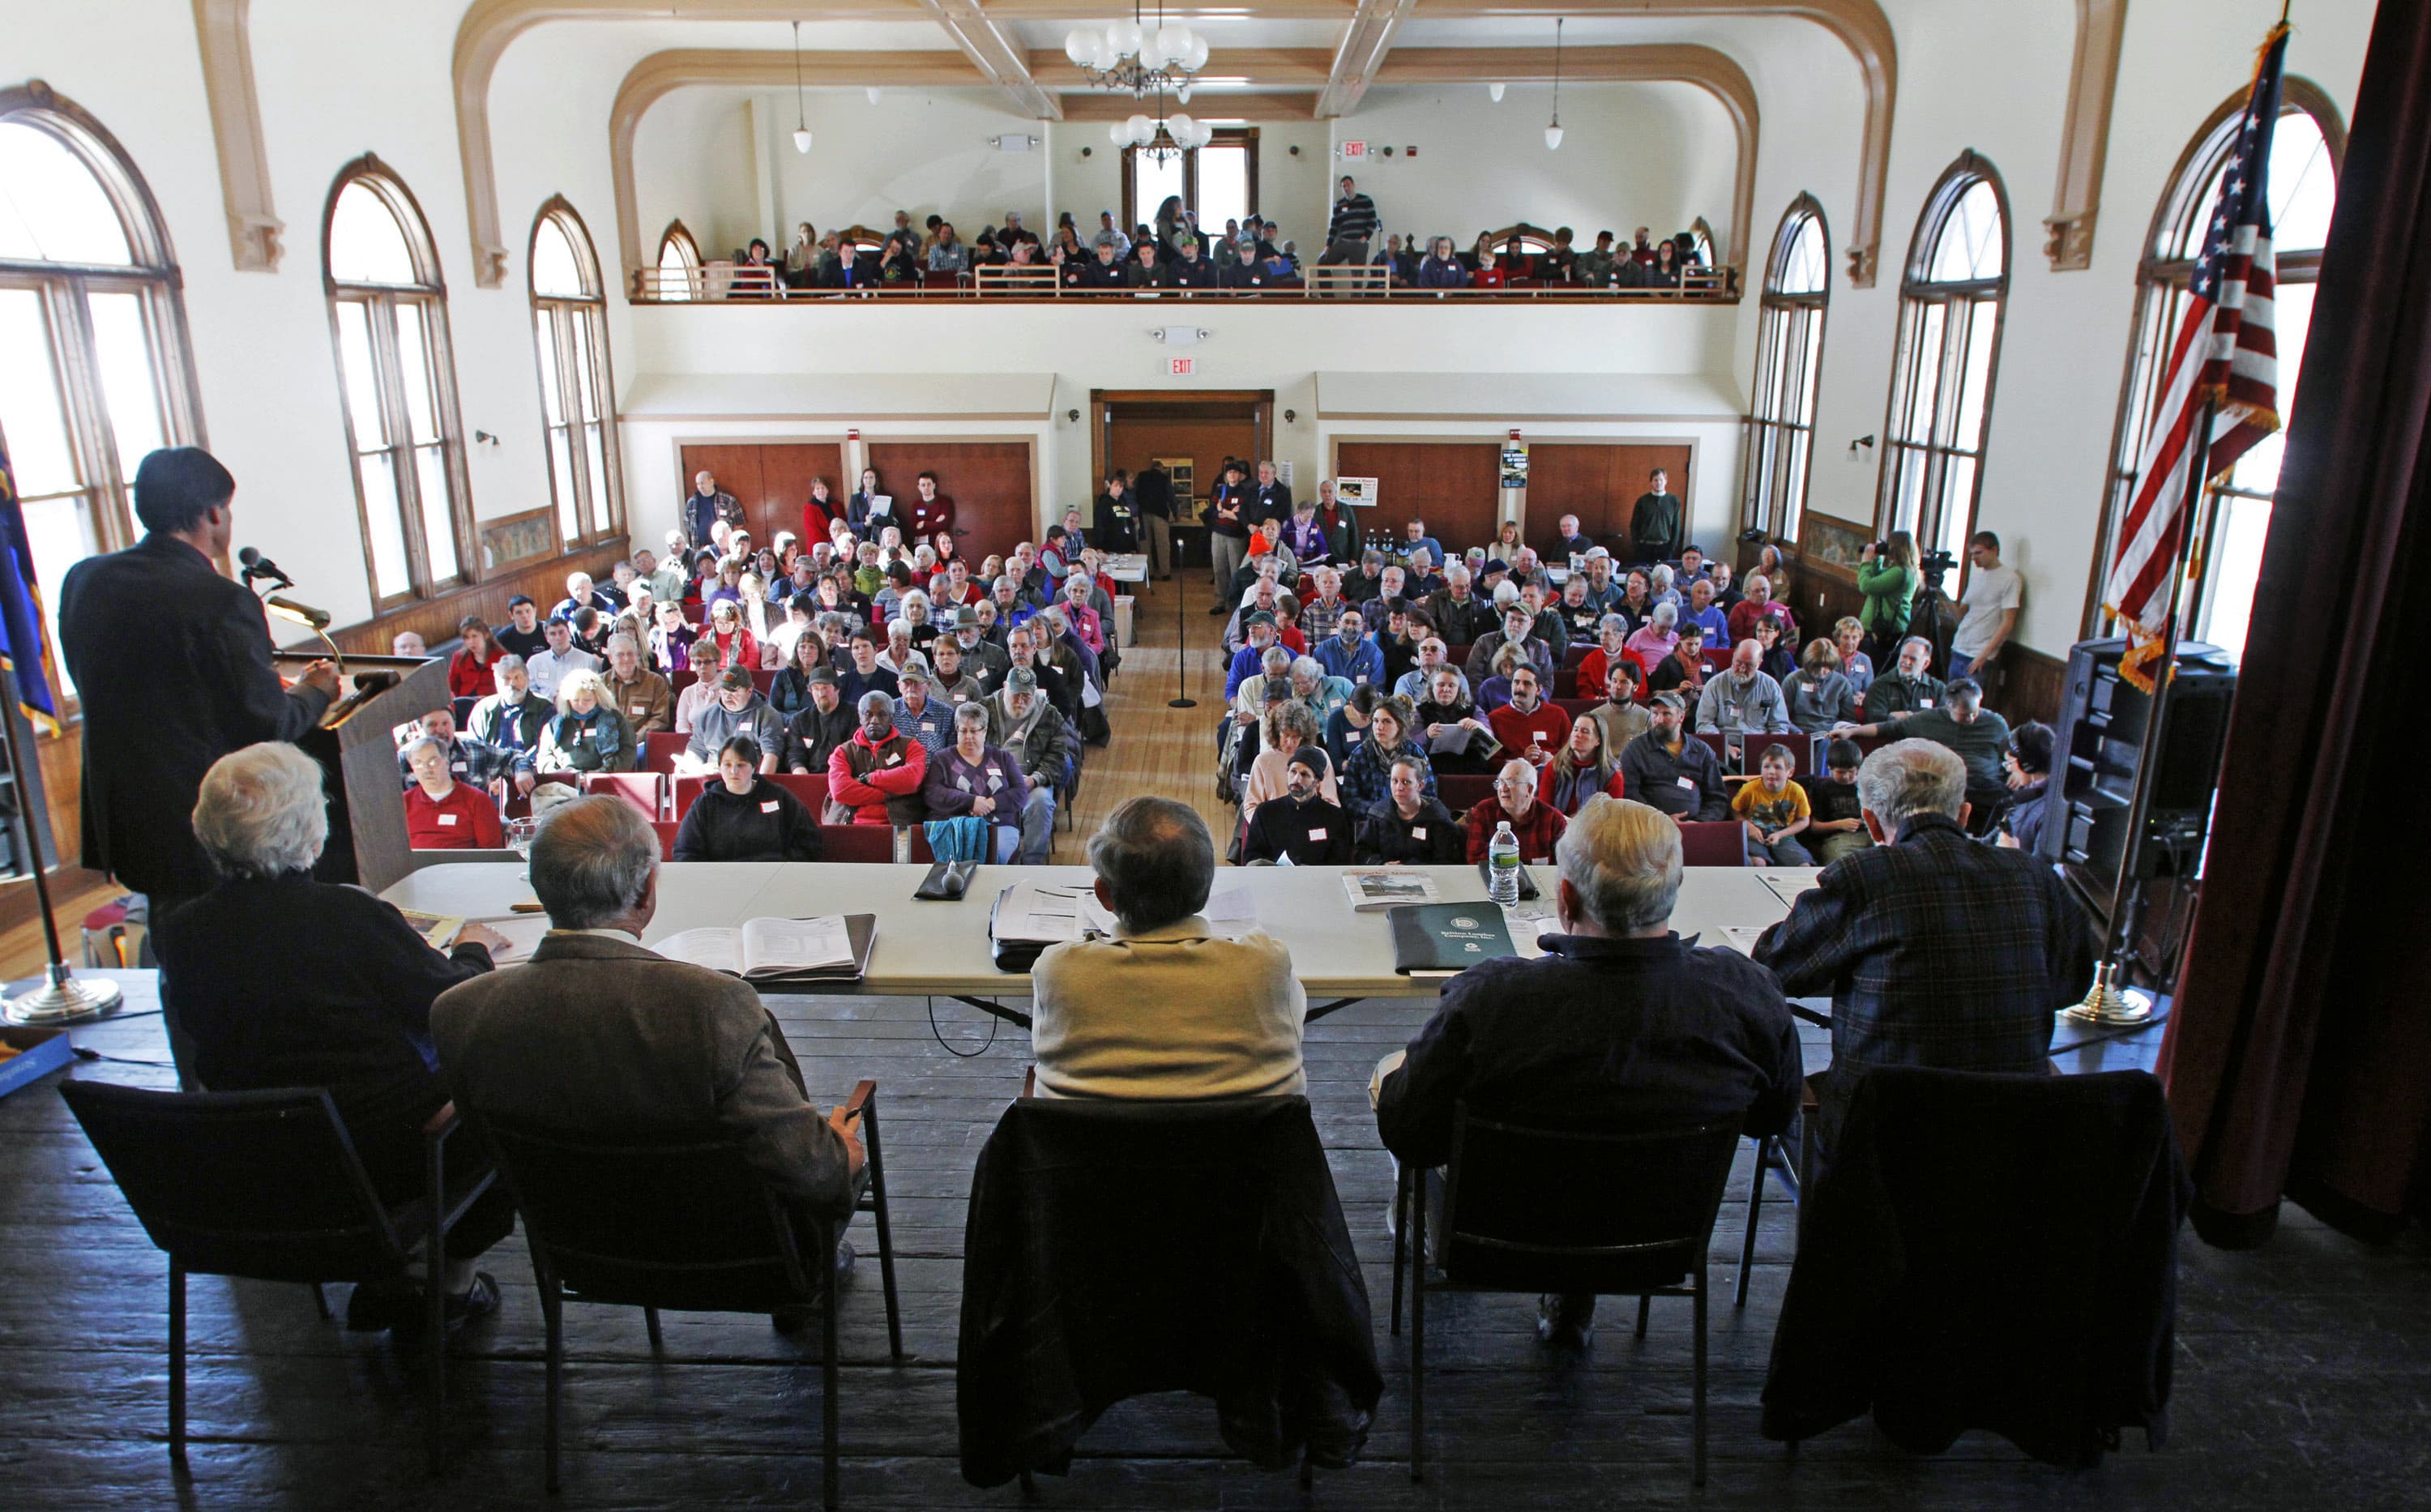 In this March 6, 2012, file photo, officials preside over the annual town meeting in Bethel, Vt. The COVID-19 pandemic is disrupting New England town meetings in 2021, a tradition where citizens gather to debate and decide on local issues. (Toby Talbot/AP File)